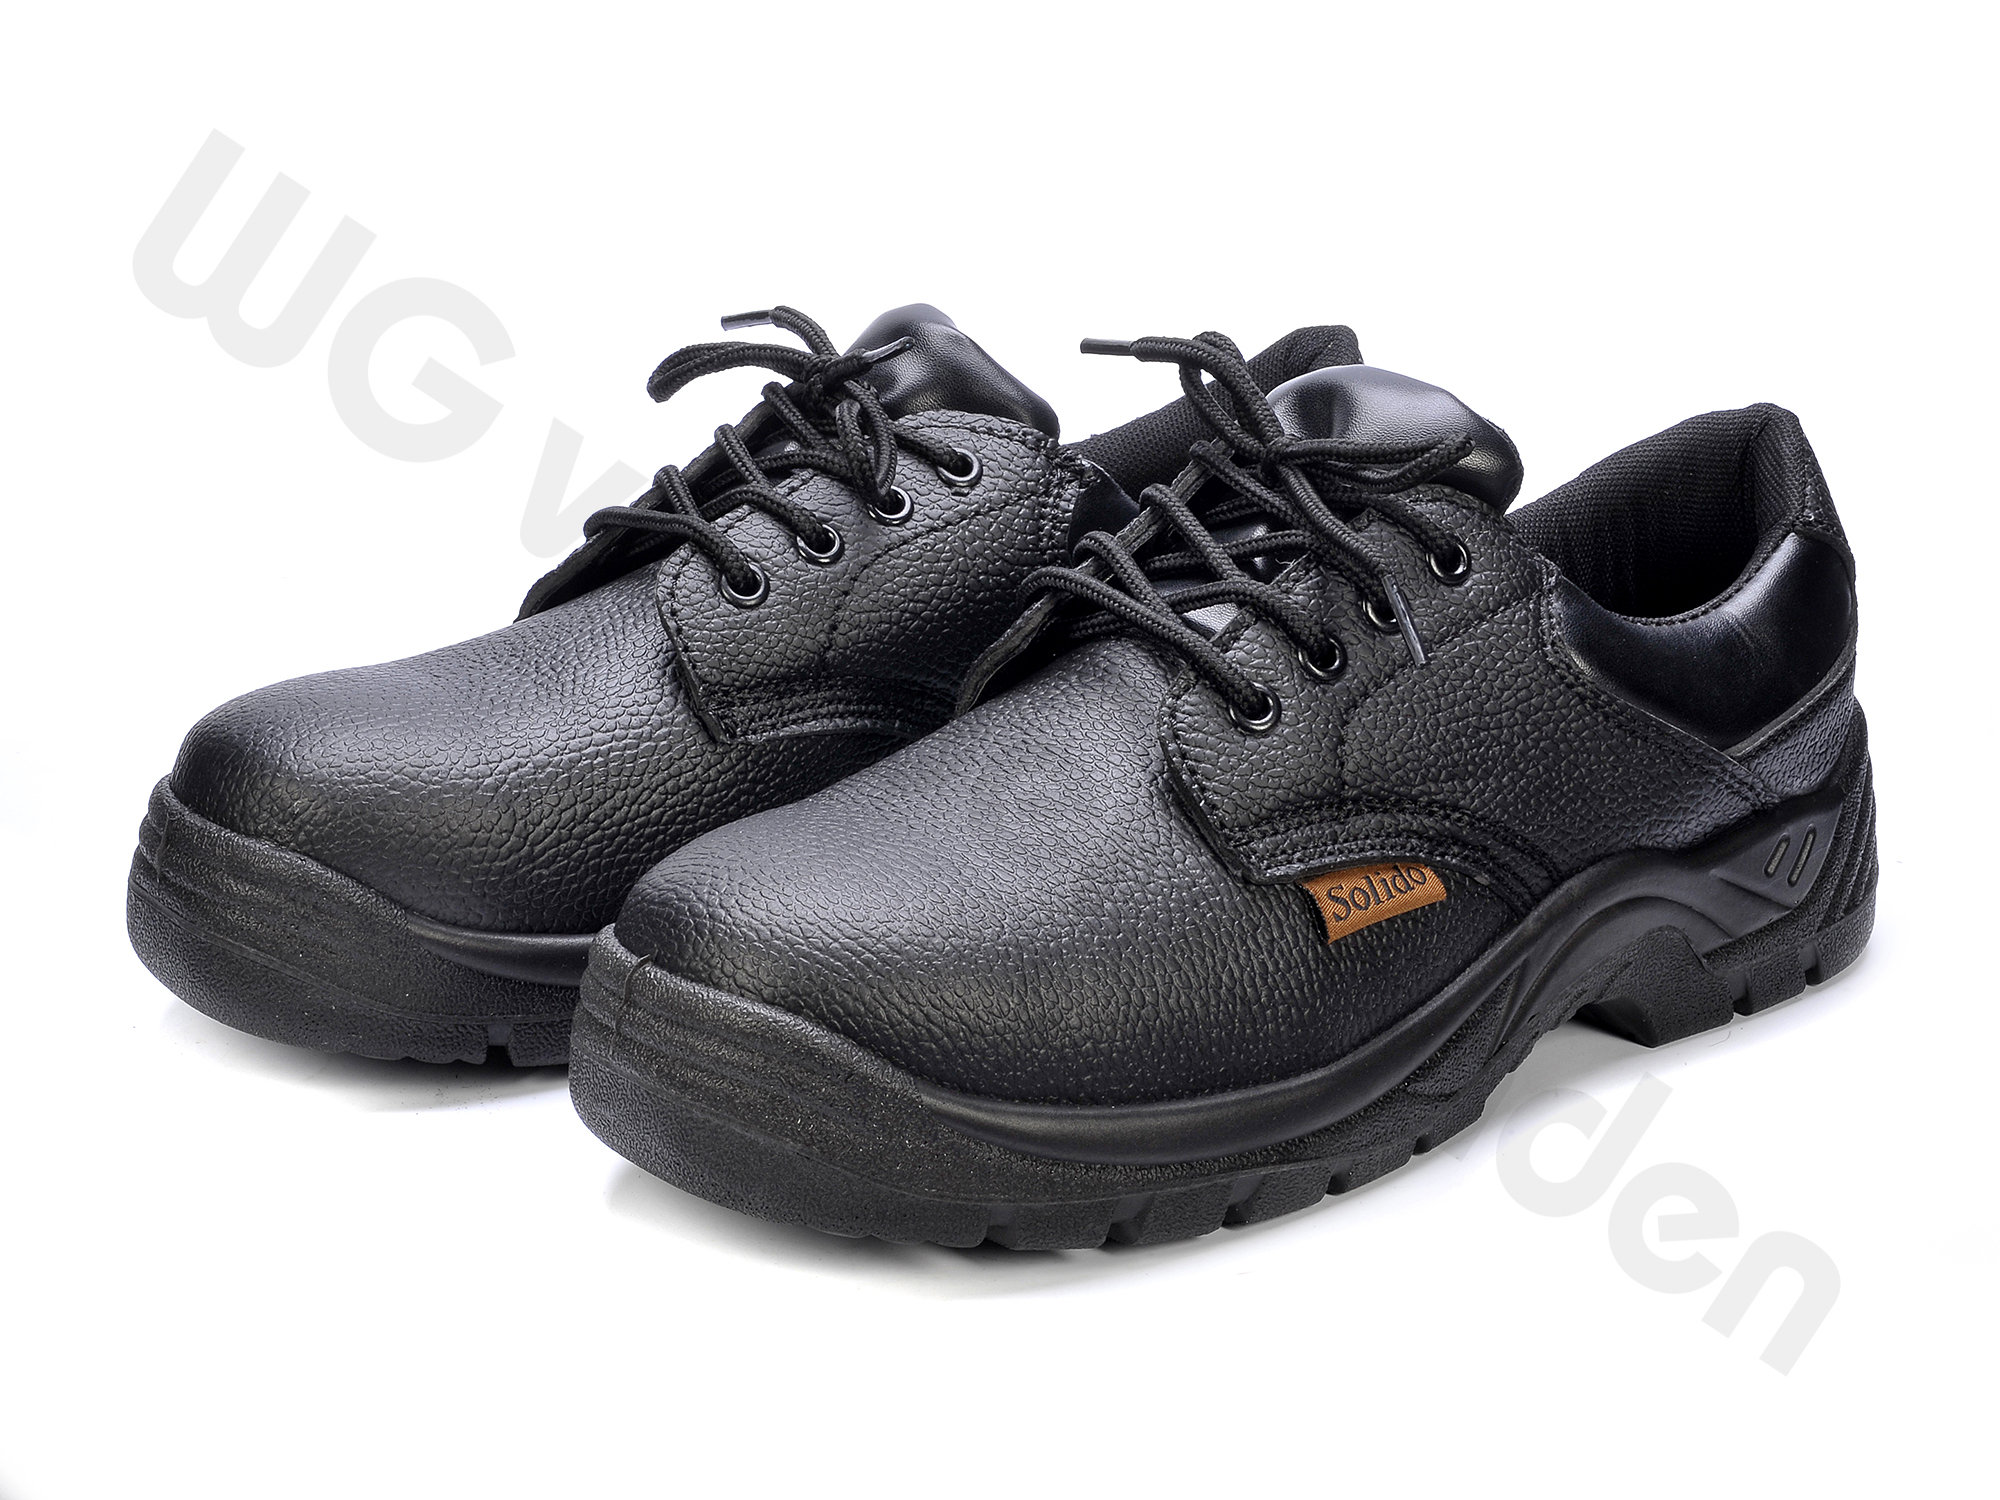 880603 SHOES SAFETY S1 WITH STEEL TOE SIZE 40 / 26.0CM CE